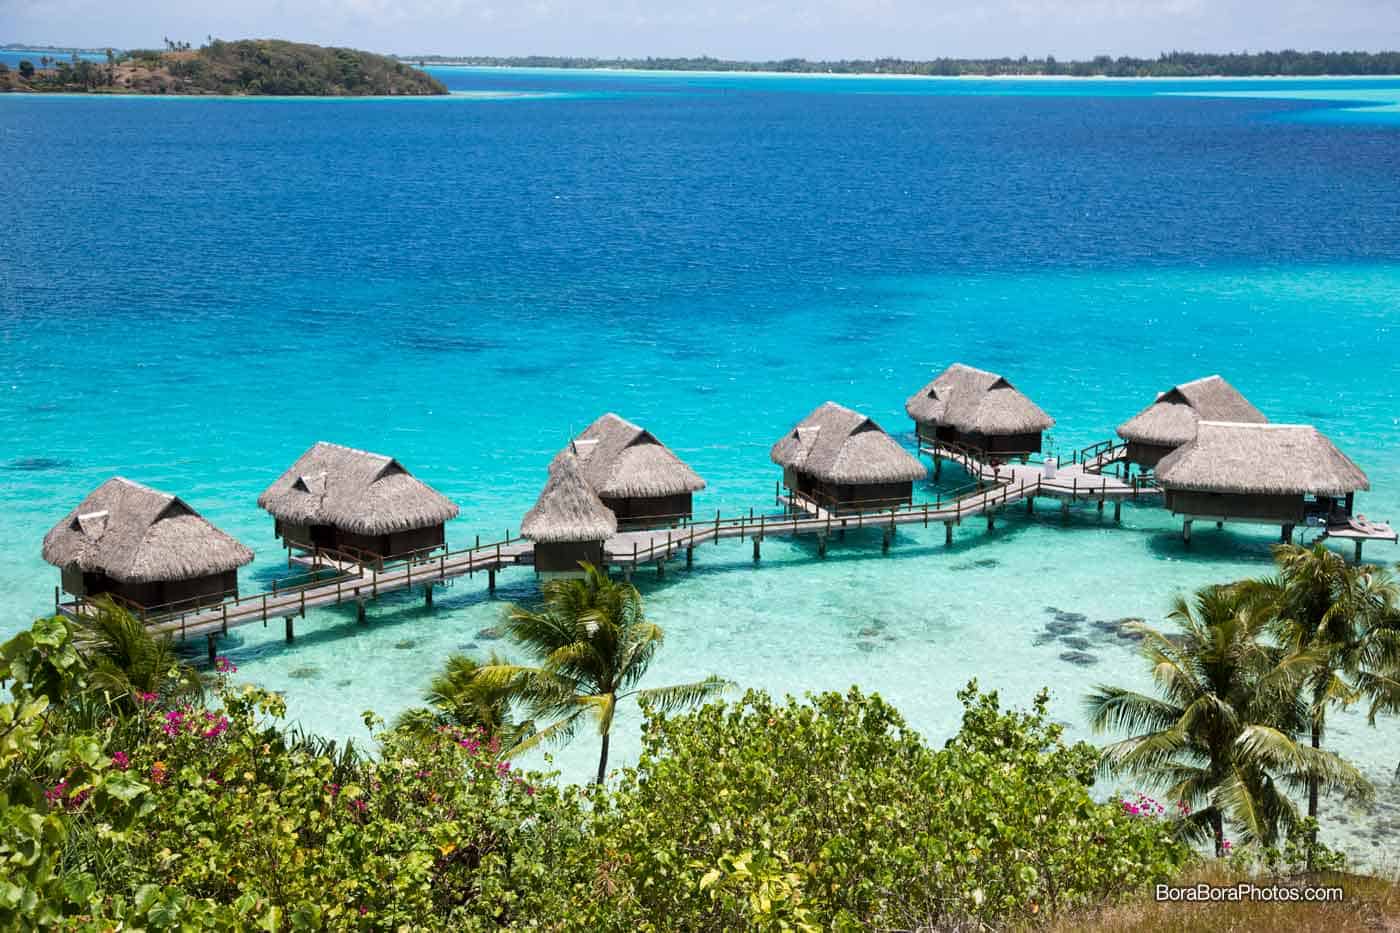 Blue lagoon and overwater bungalows at the Sofitel private island resort.